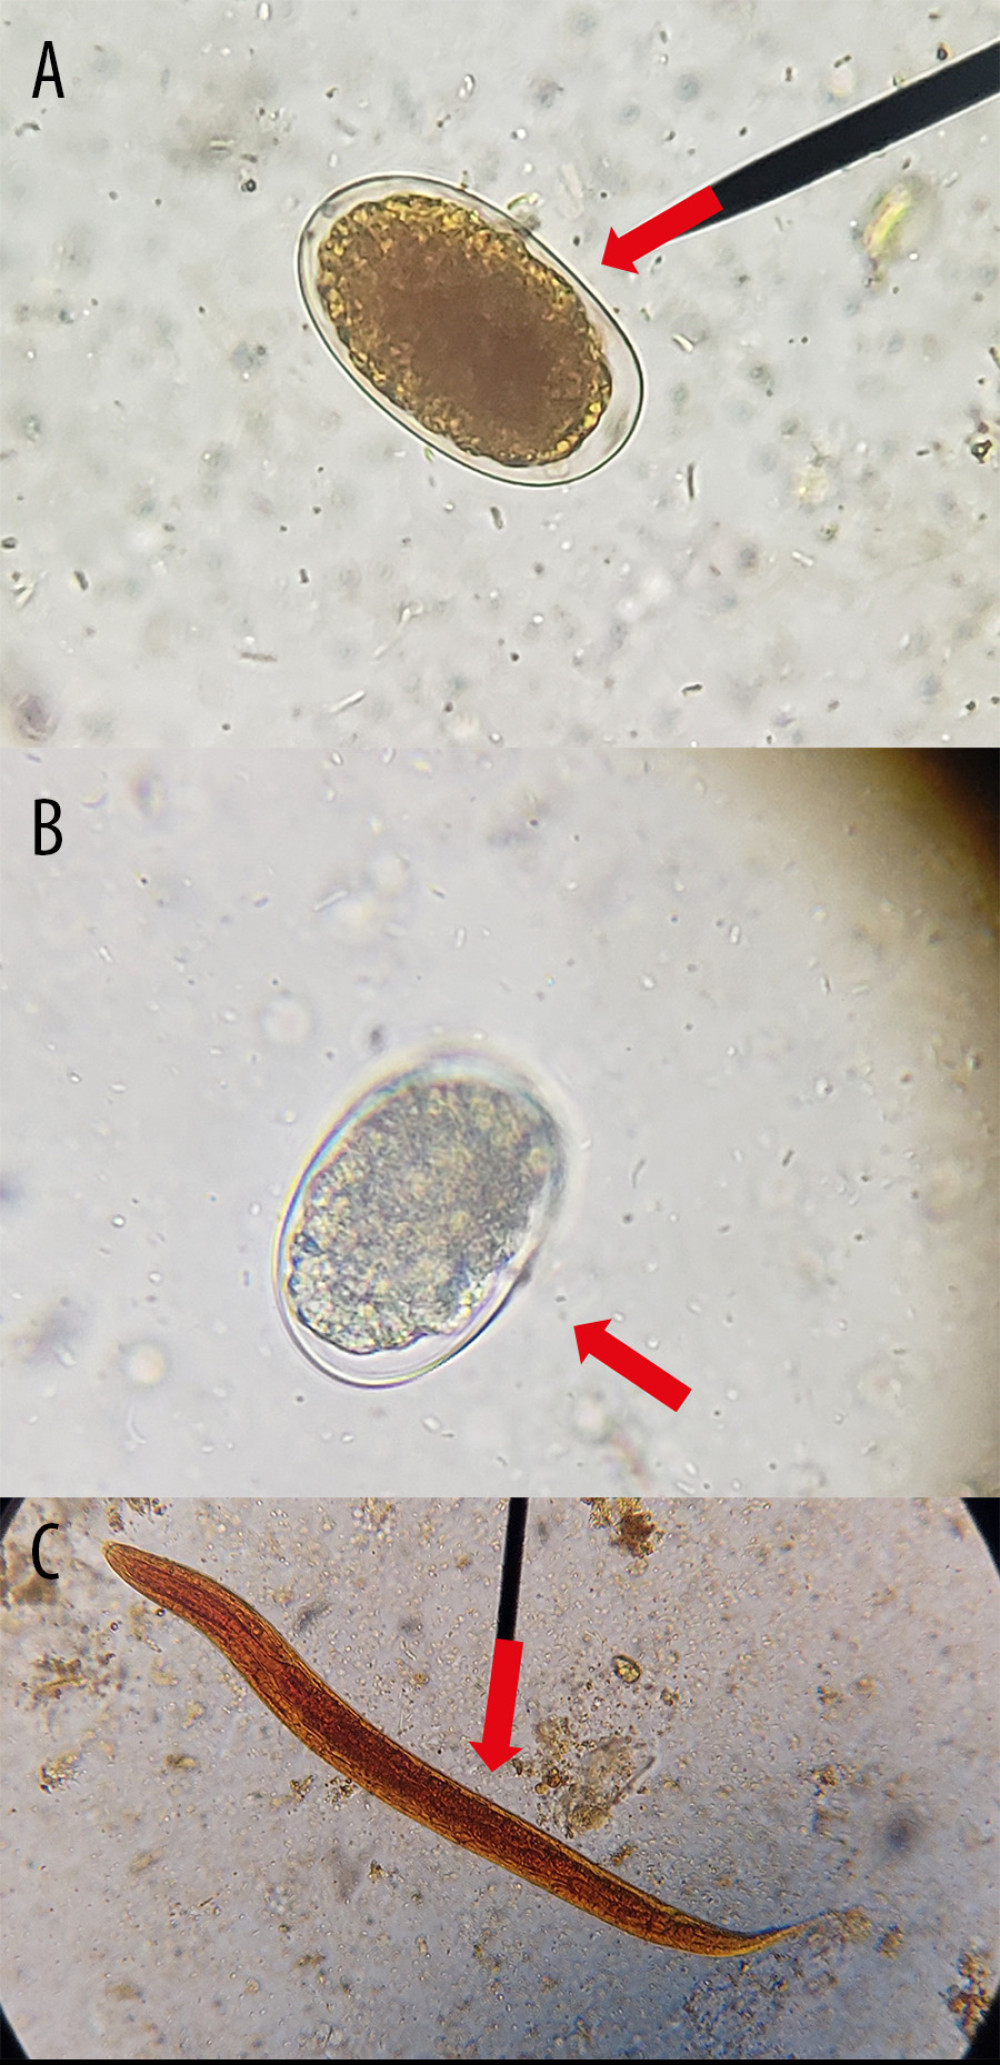 Microscopic identification of (A) egg of Ancylostoma caninum (red arrow) in feces of domestic dogs, (B) egg of Ancylostoma caninum (red arrow) in feces of rodent through the technique of sedimentation by centrifugation using saline solution and (C) larvae of Ancylostoma caninum in feces of domestic dog (red arrow) obtained by the technique of modified Baermann, observed by optical microscopy at 40× and stained/not with Lugol. (Taken by the authors).